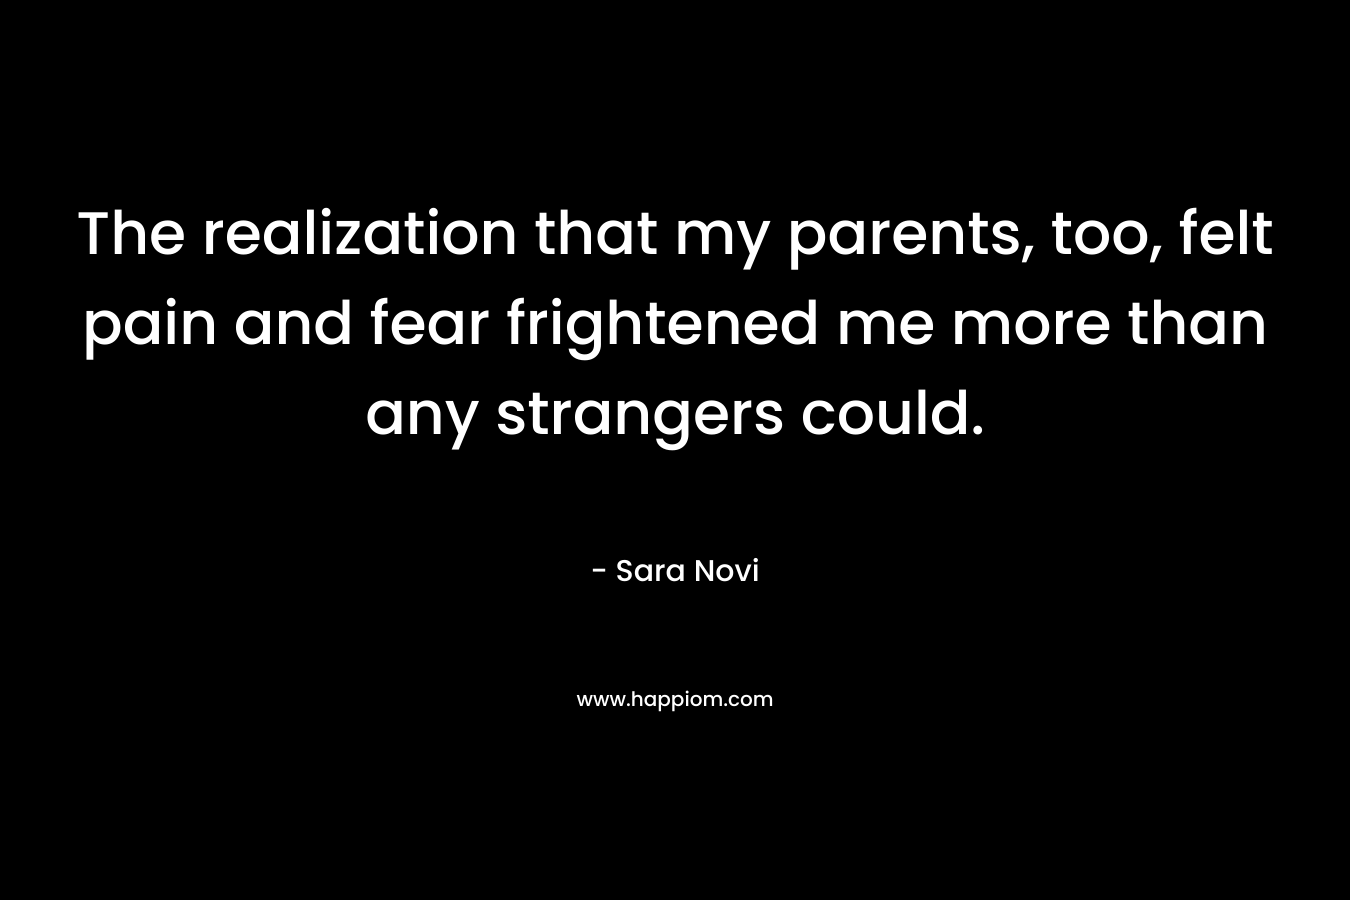 The realization that my parents, too, felt pain and fear frightened me more than any strangers could.